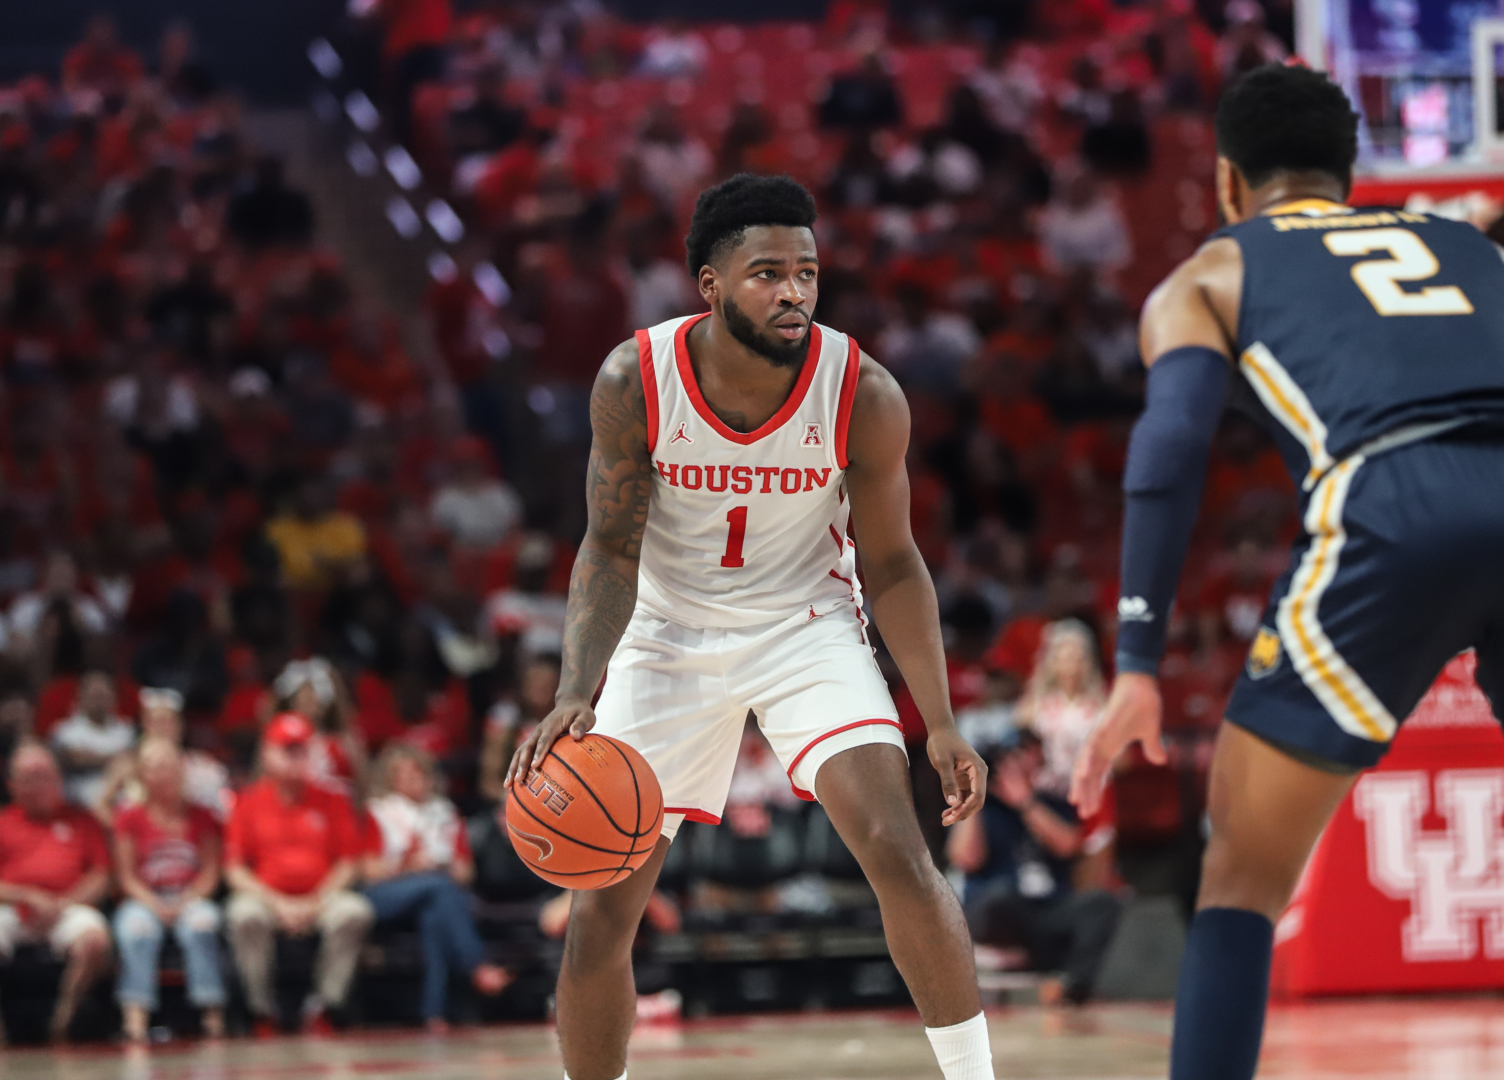 Jamal Shead had 11 first-half points in UH's win over Oregon on Sunday night. | Sean Thomas/The Cougar